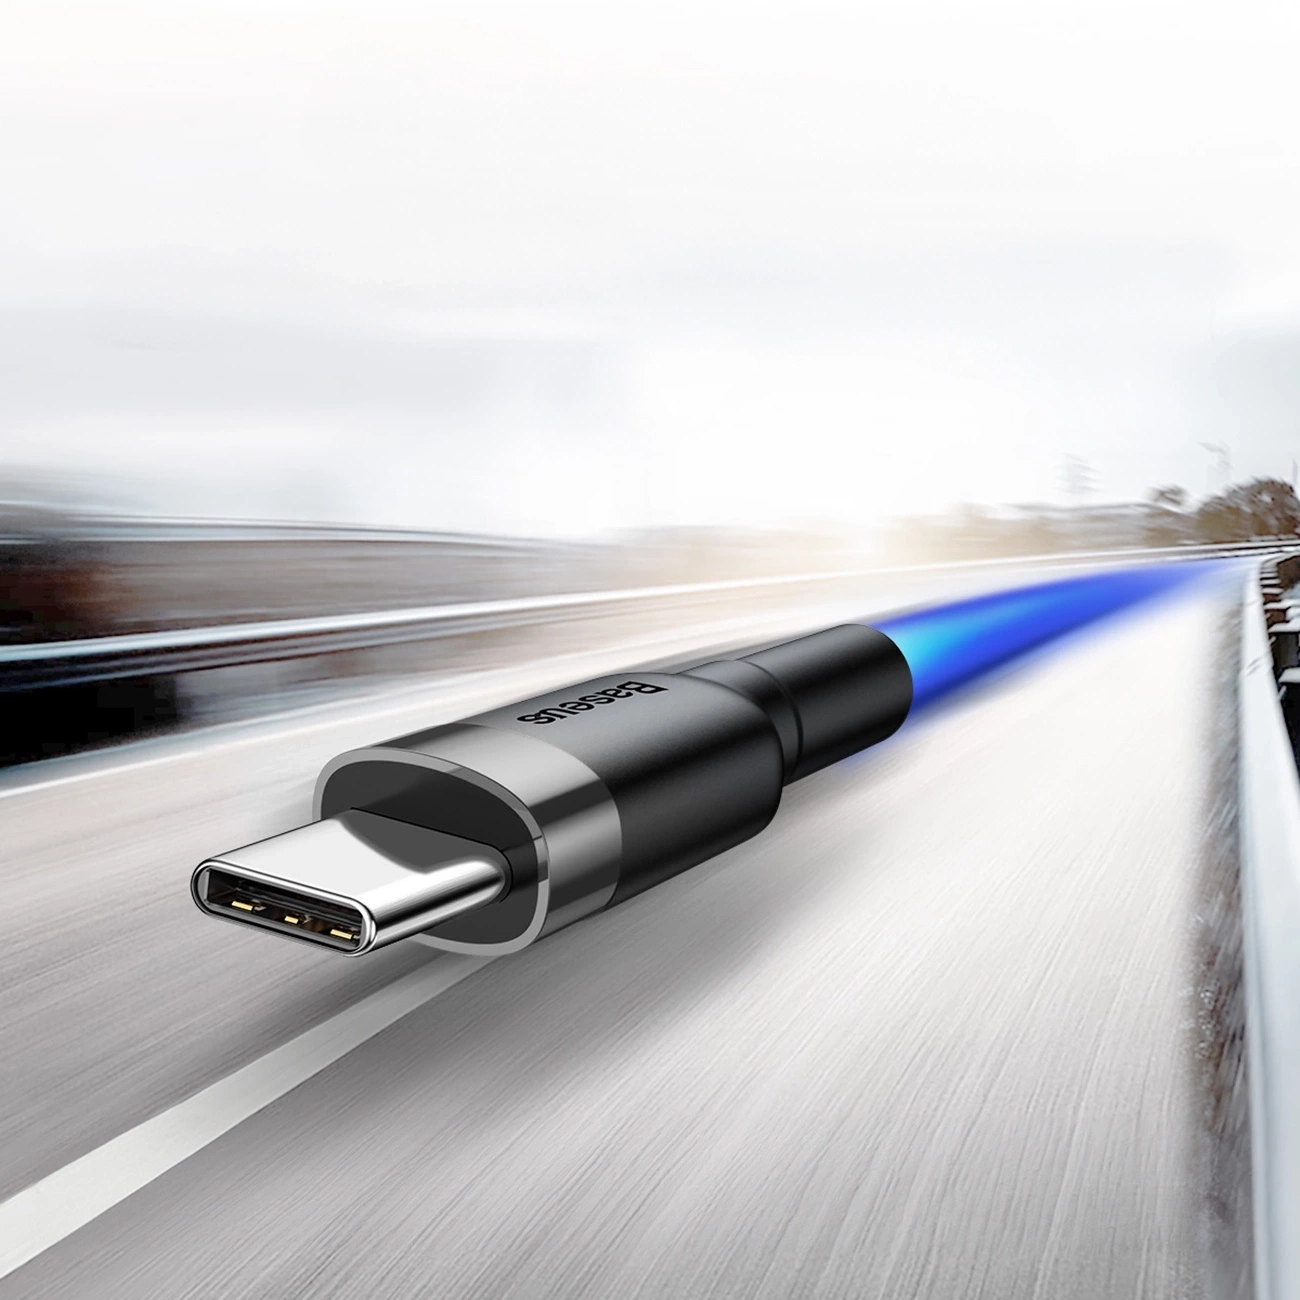 black and gray Baseus Cafule USB-A / USB-C cable moving at the speed of light on a highway.